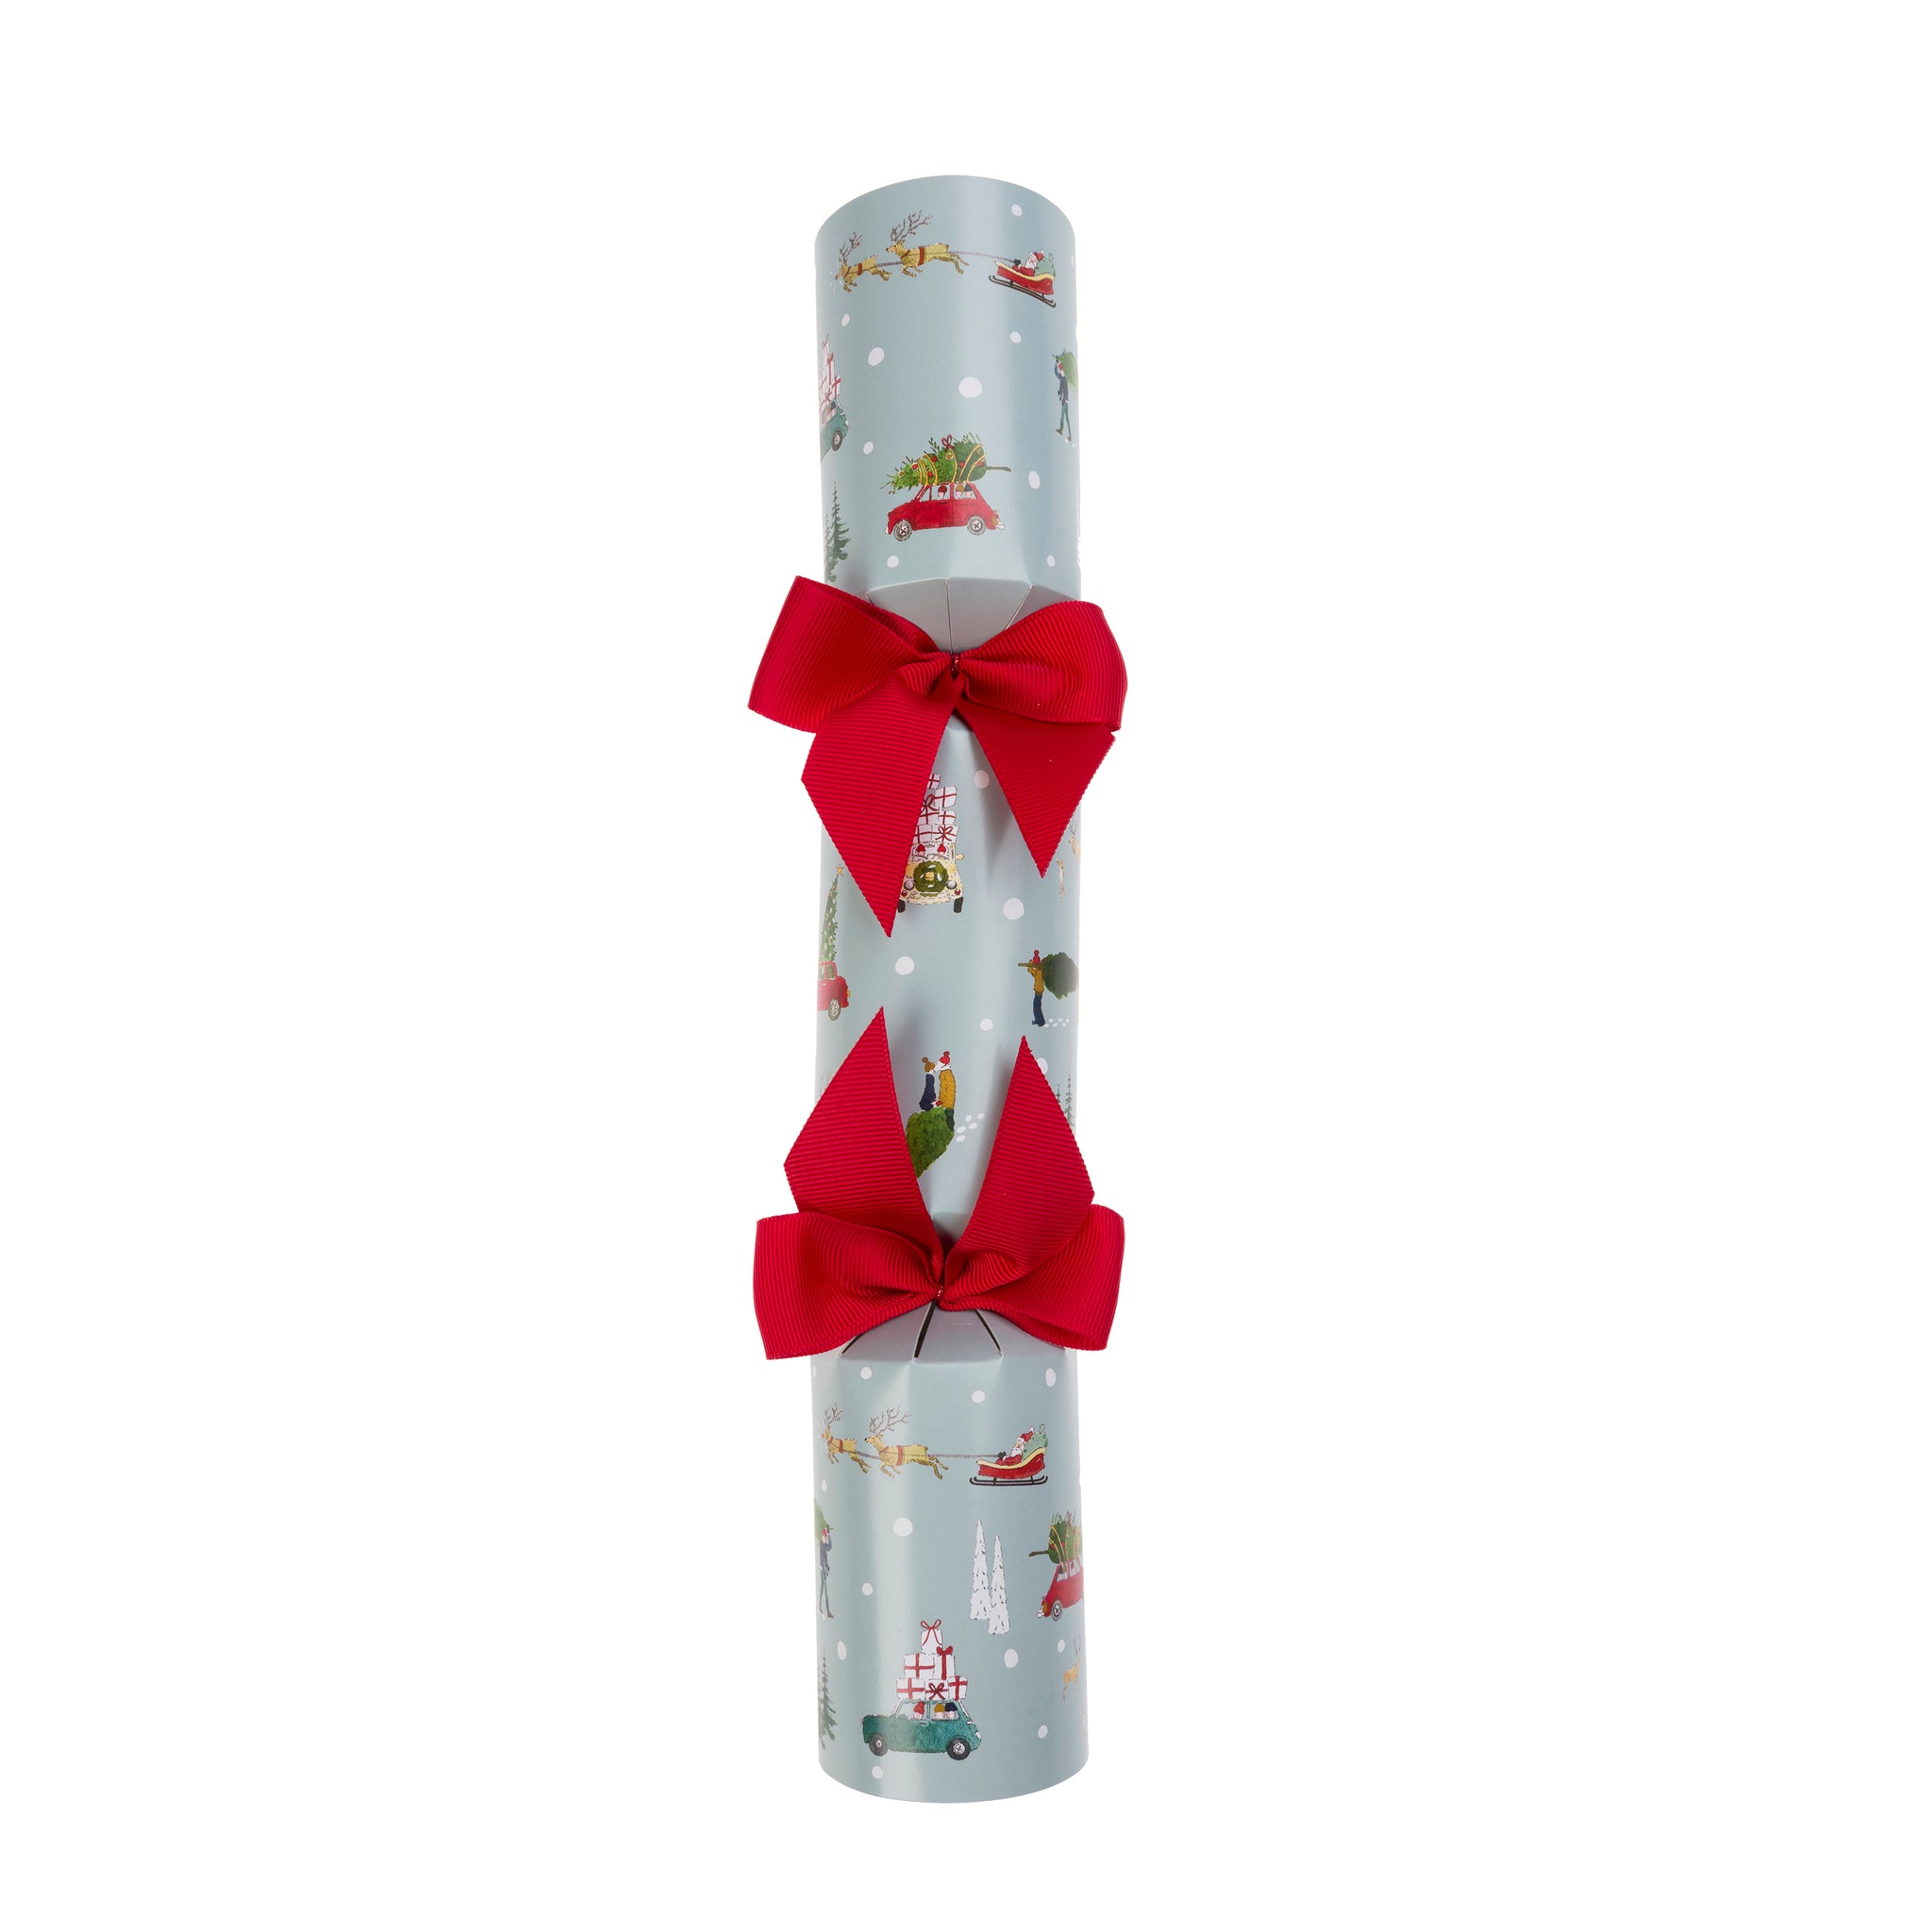 Home for Christmas Crackers (Set of 6)